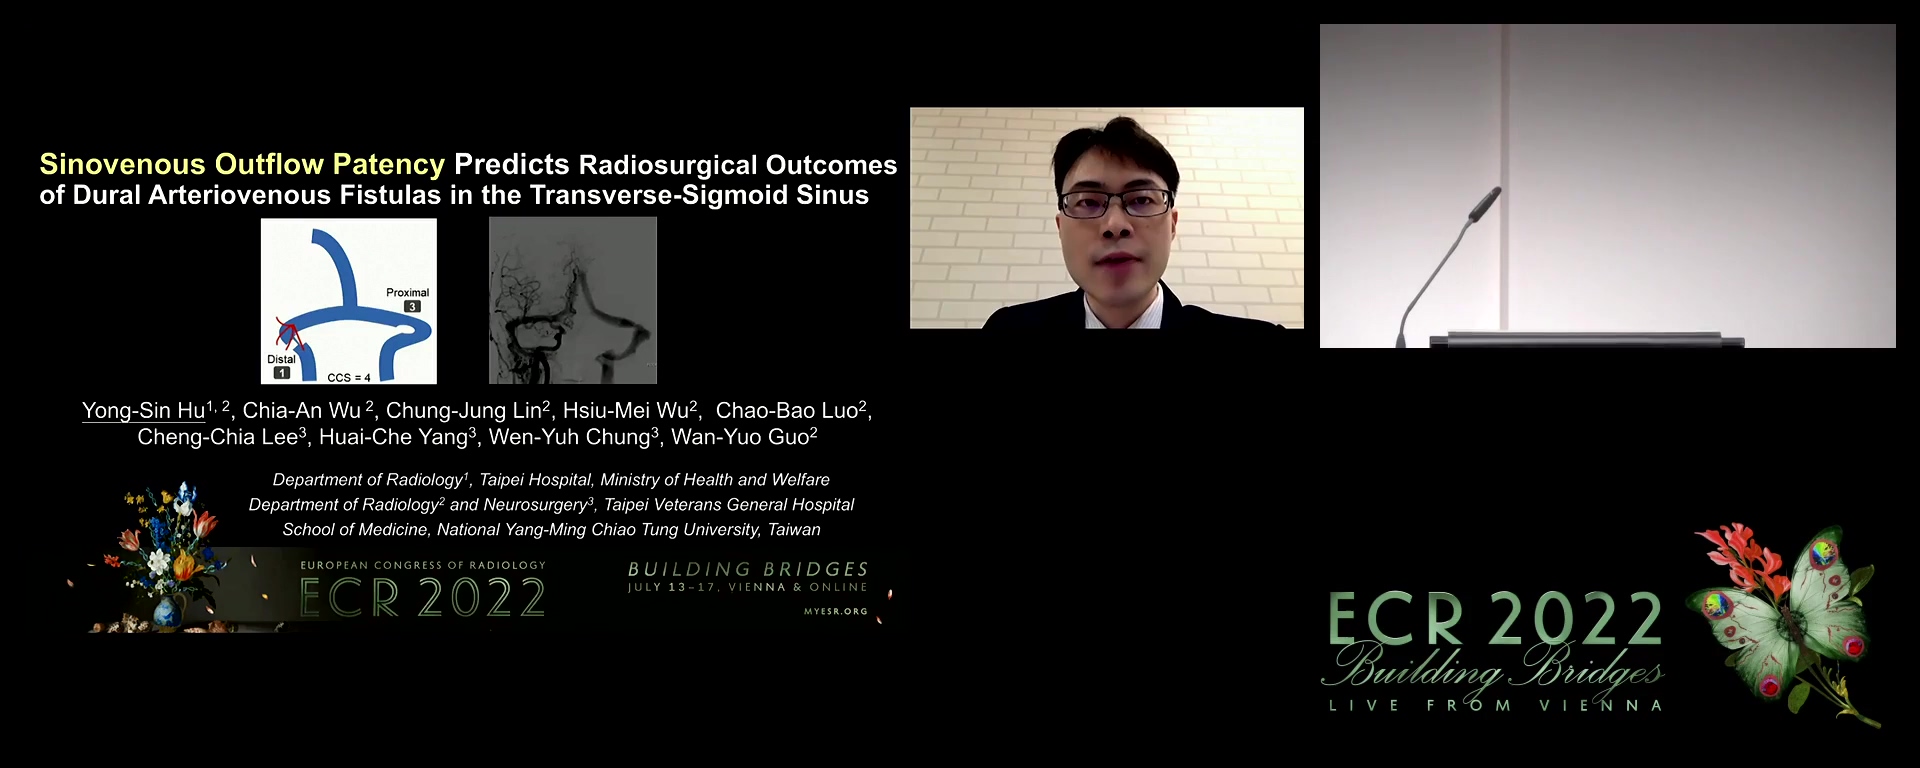 Sinovenous outflow patency predicts radiosurgical outcomes of dural arteriovenous fistulas in the transverse-sigmoid sinus - Yong-Sin Hu, New Taipei / TW